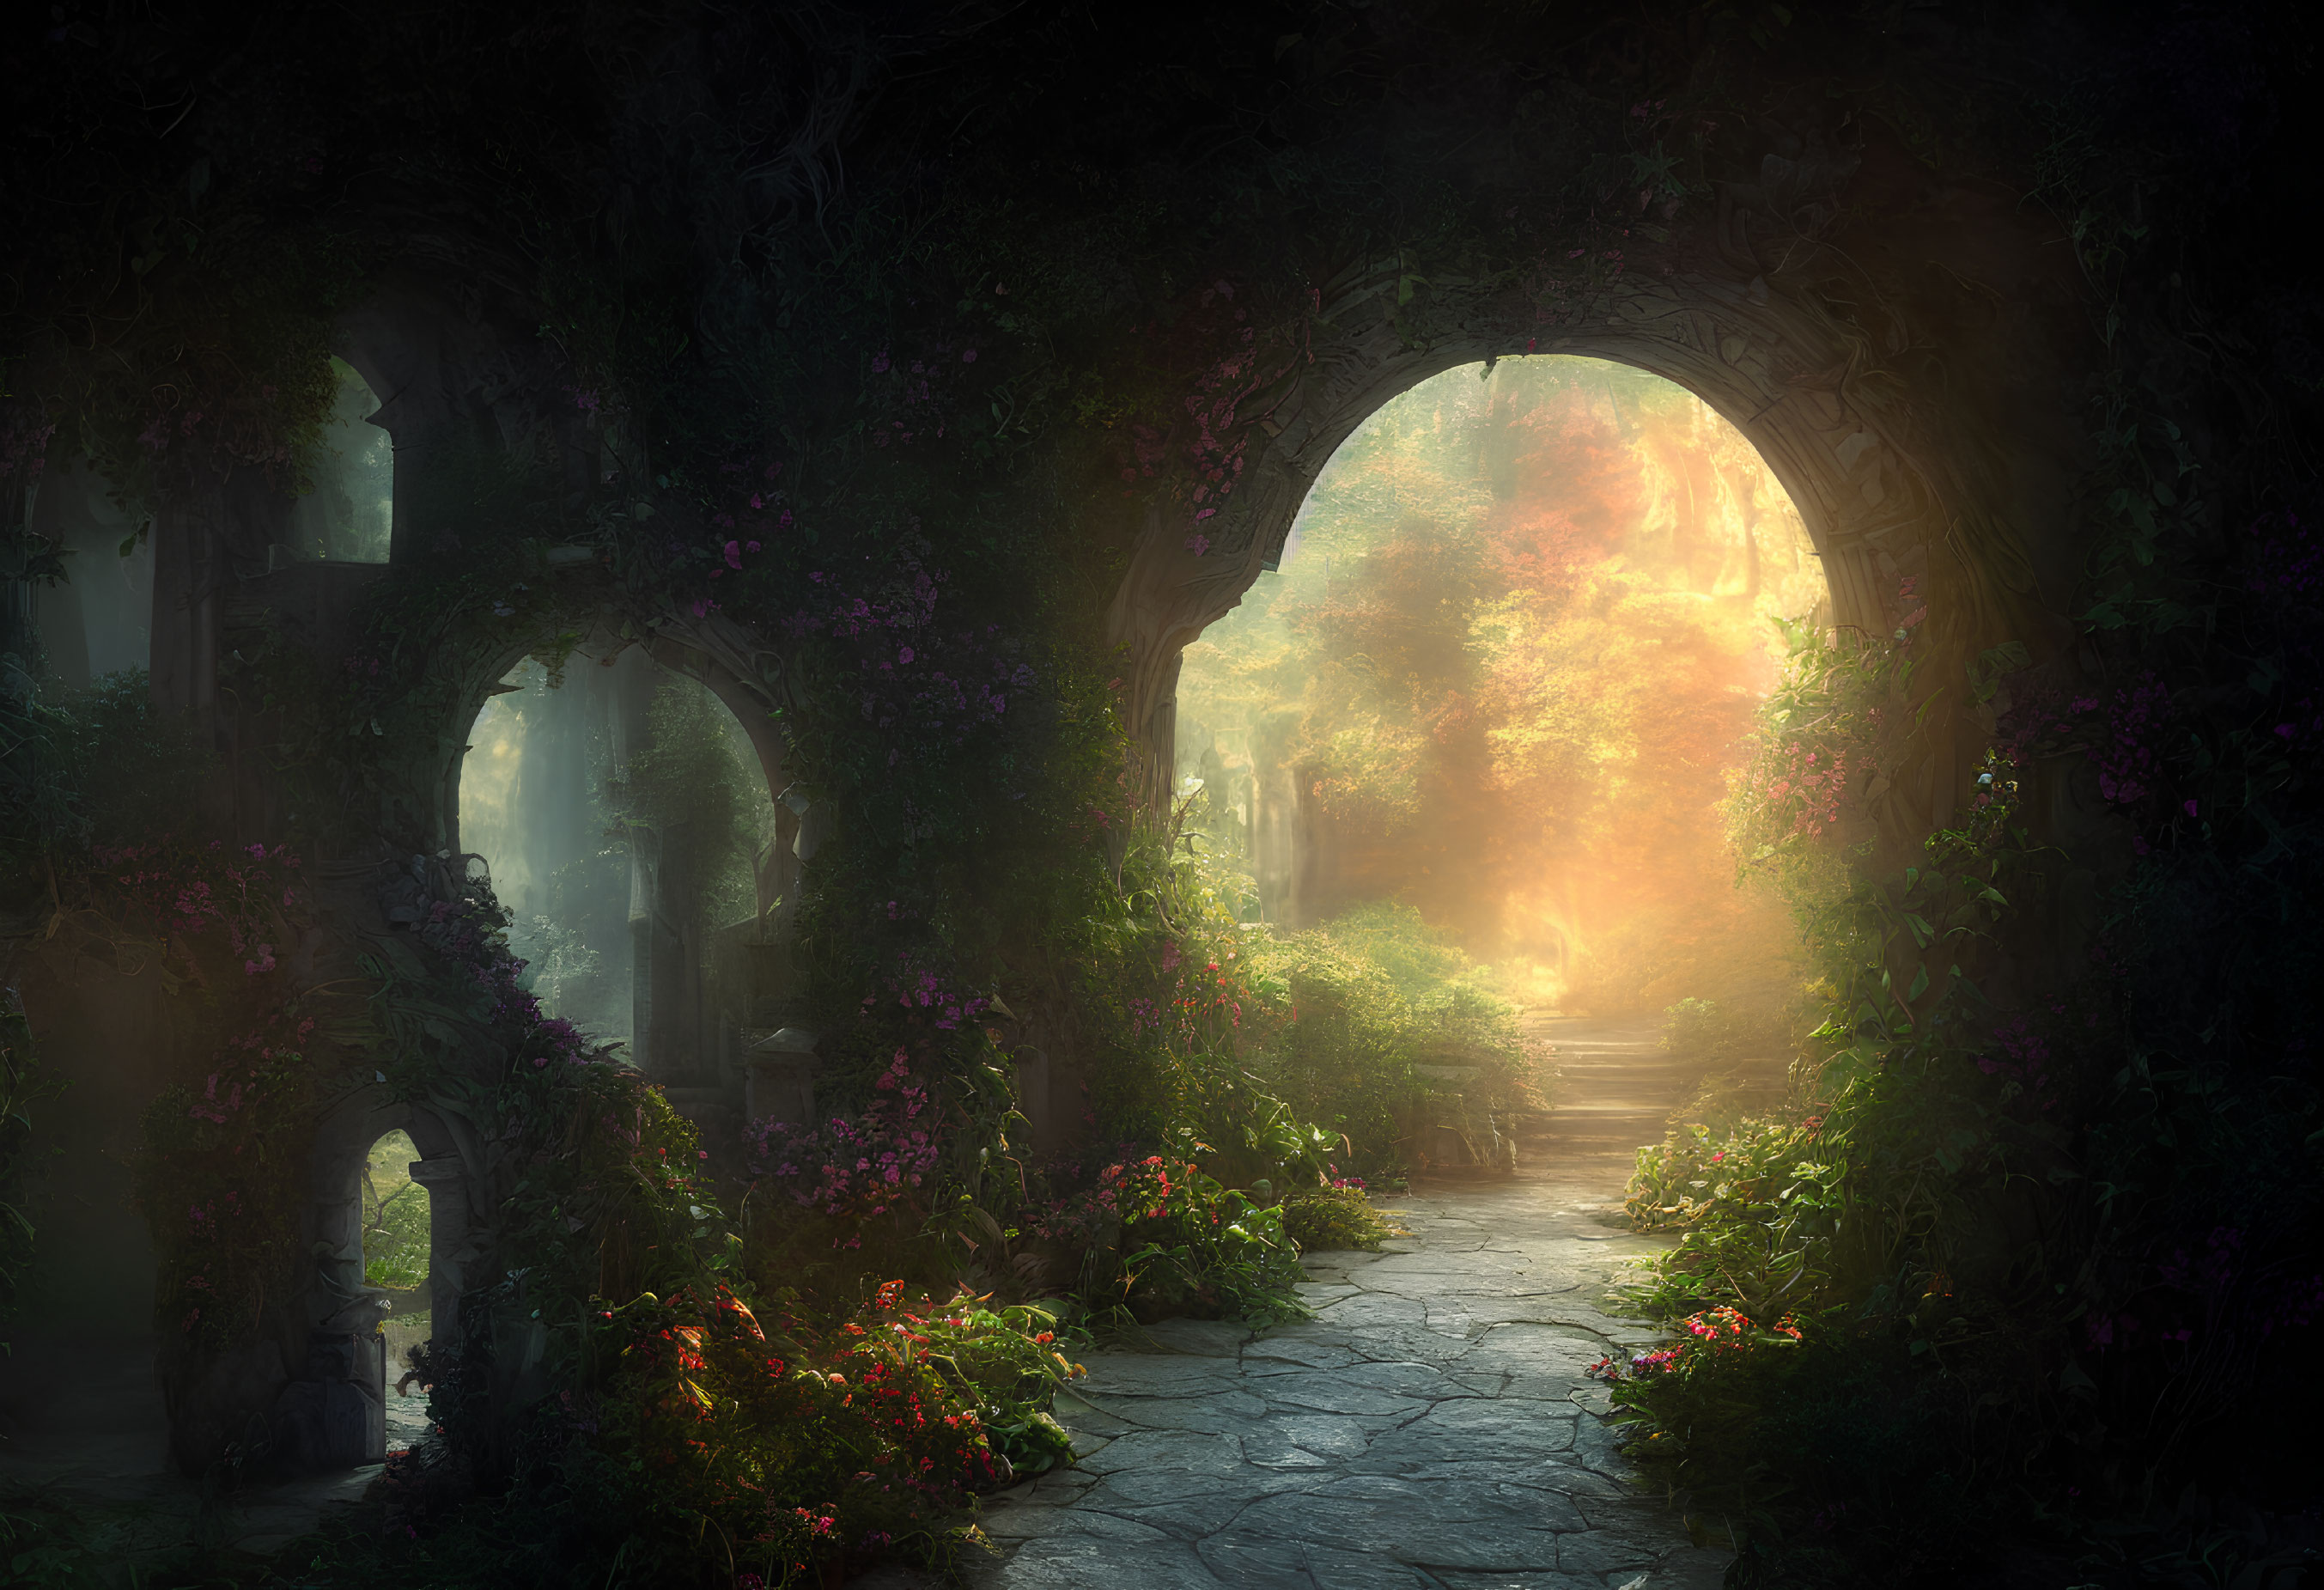 Enchanted forest clearing with stone pathway and arched ruins surrounded by greenery